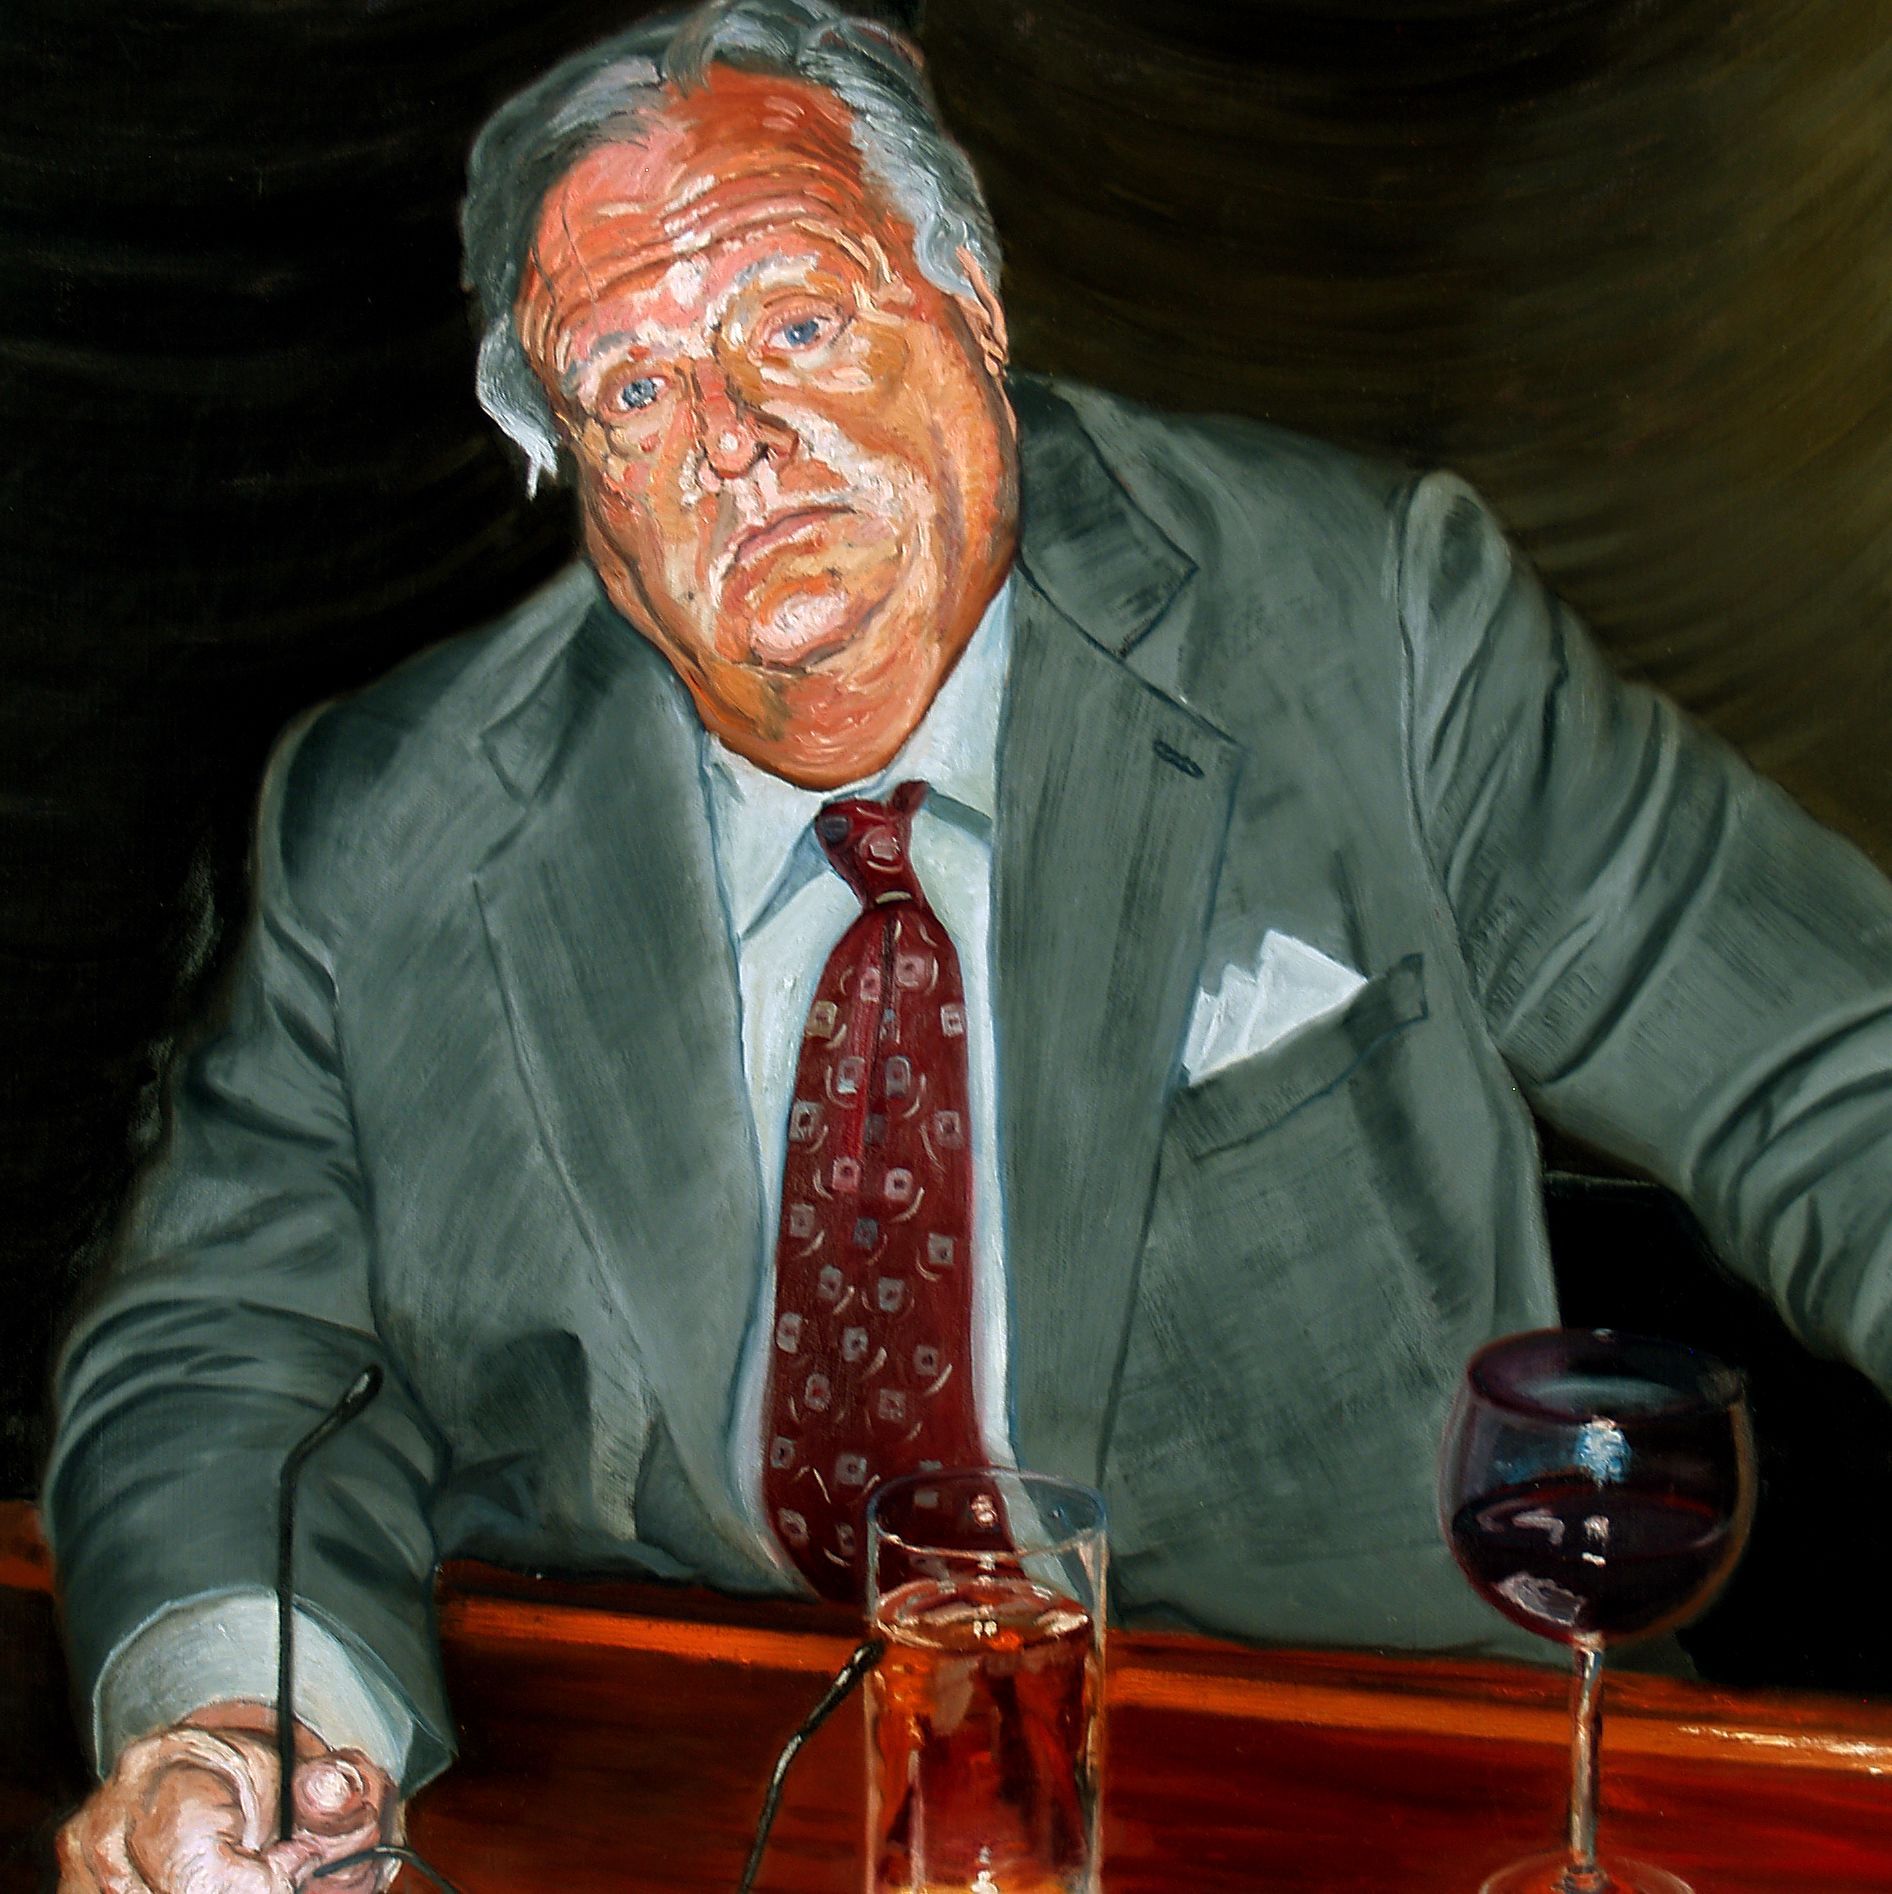 Sir Charles | Figurative Oil Painting by John Varriano